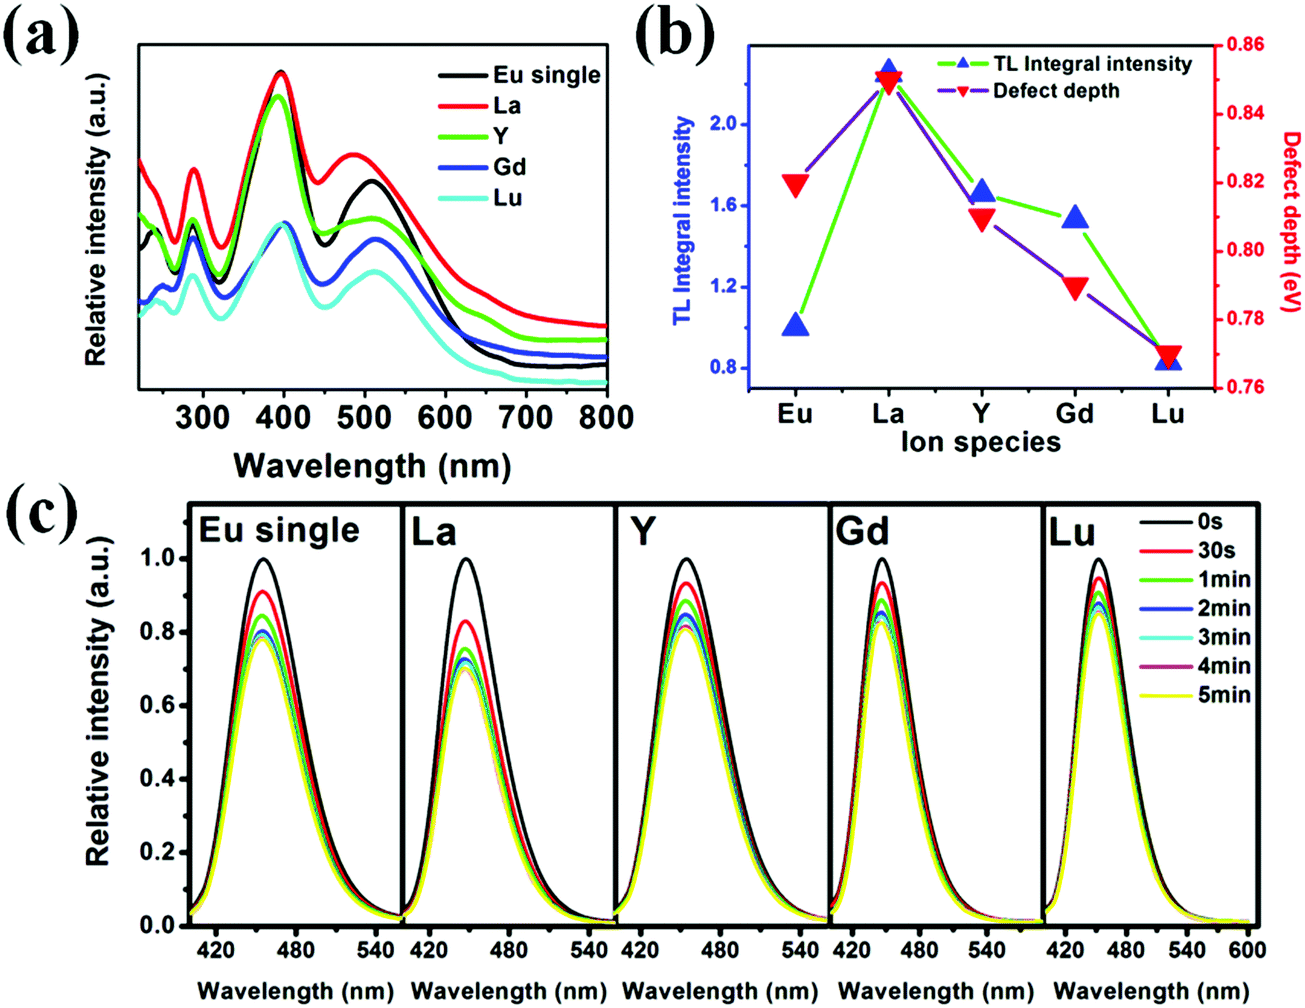 Reversible Photoluminescence Switching In Photochromic Material Sr 6 Ca 4 Po 4 6 F 2 Eu 2 And The Modified Performance By Trap Engineering Via Ln Journal Of Materials Chemistry C Rsc Publishing Doi 10 1039 D0tcd